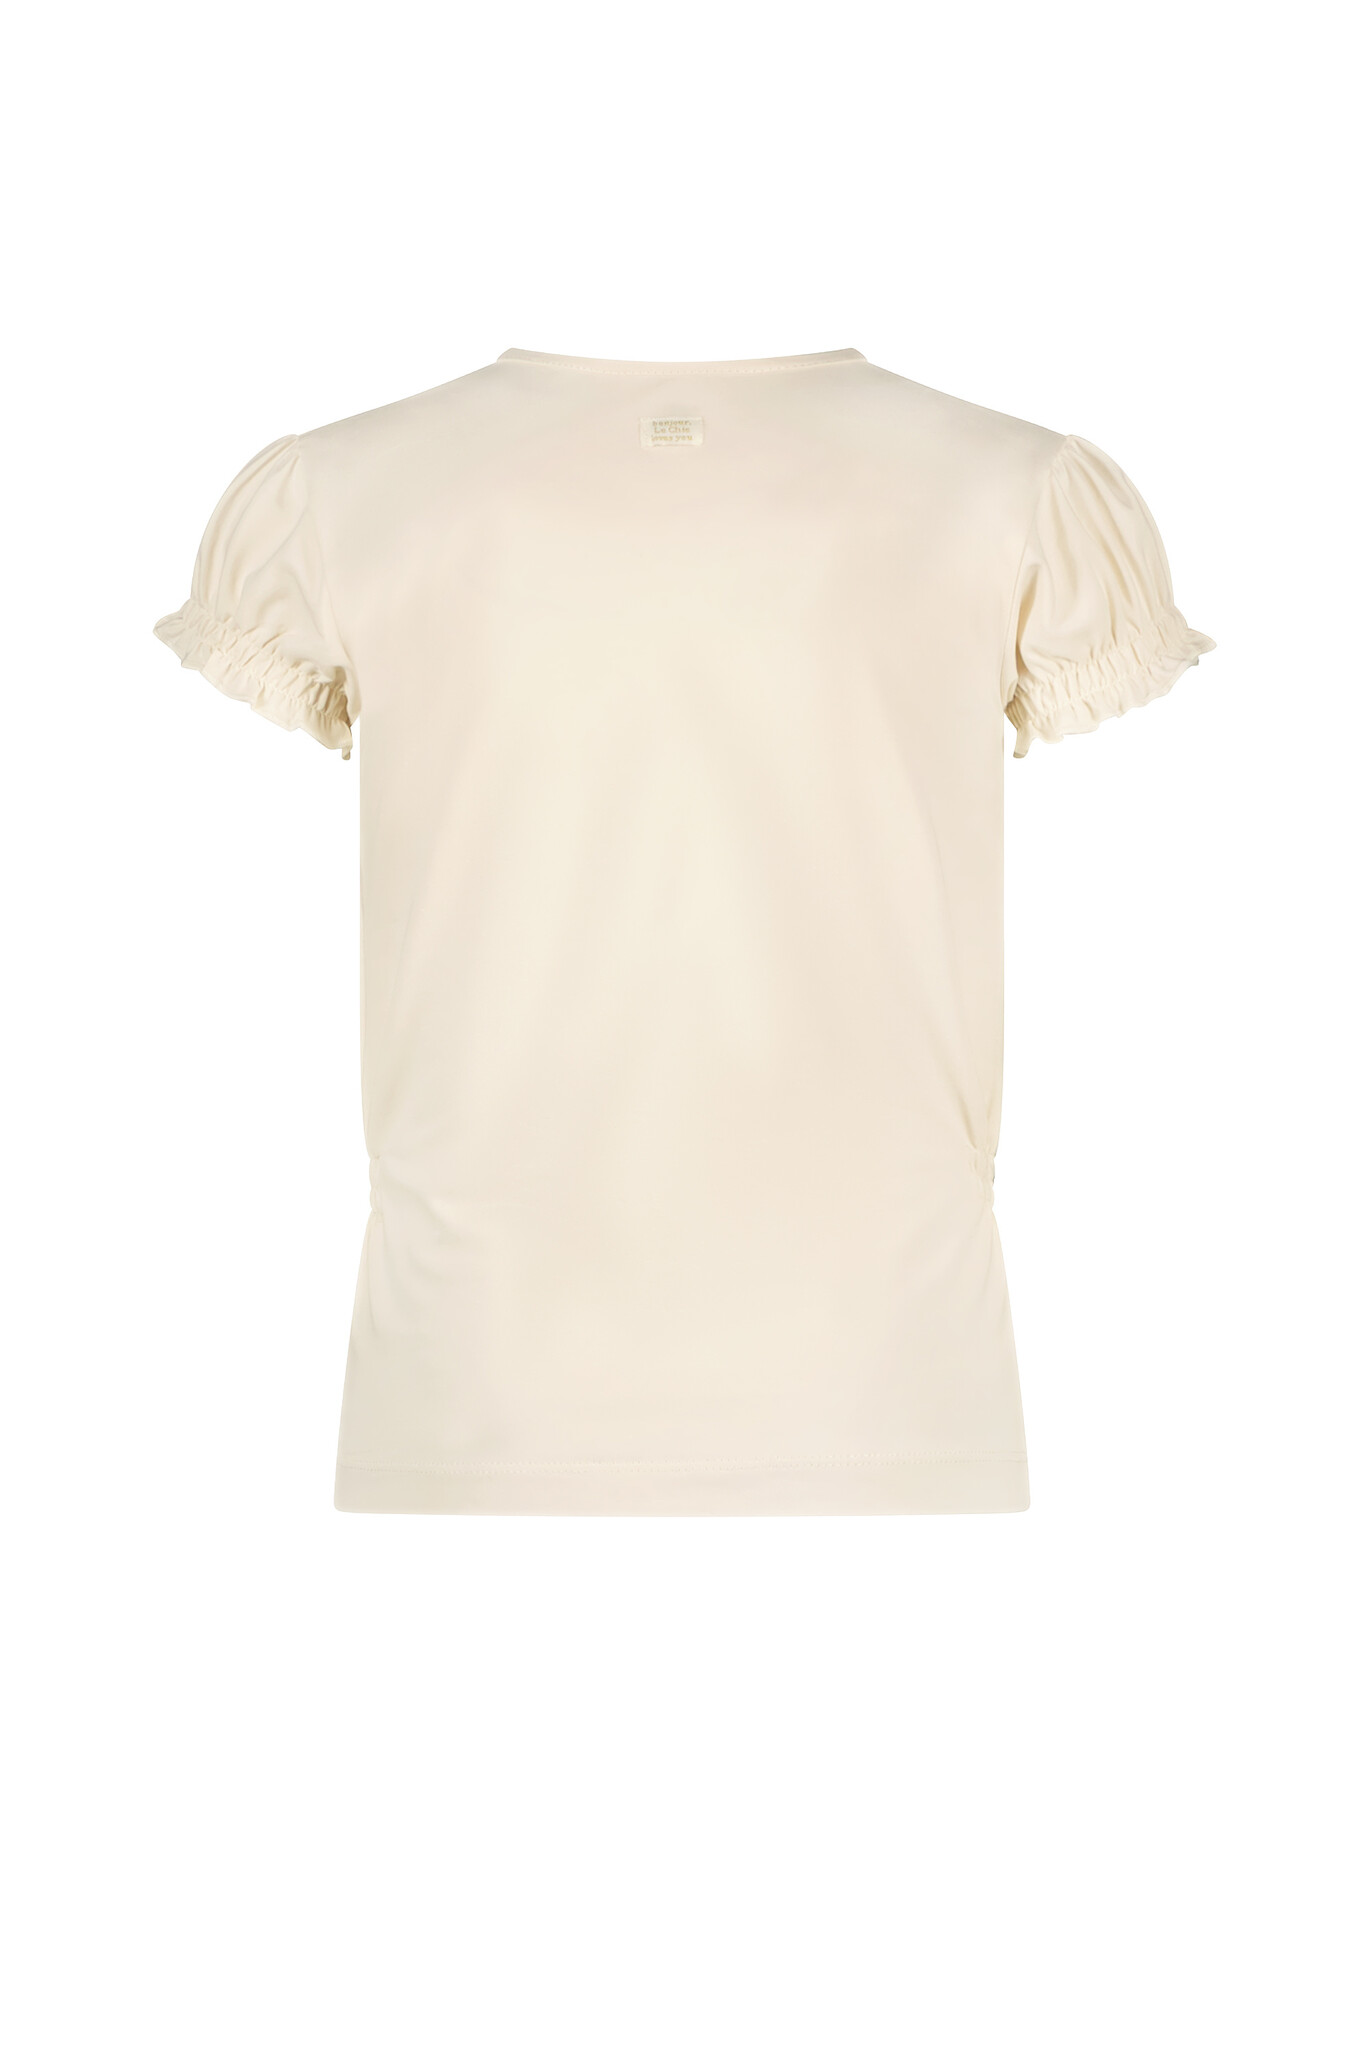 Nomsa Flowers and Bees Tee - Pearled Ivory